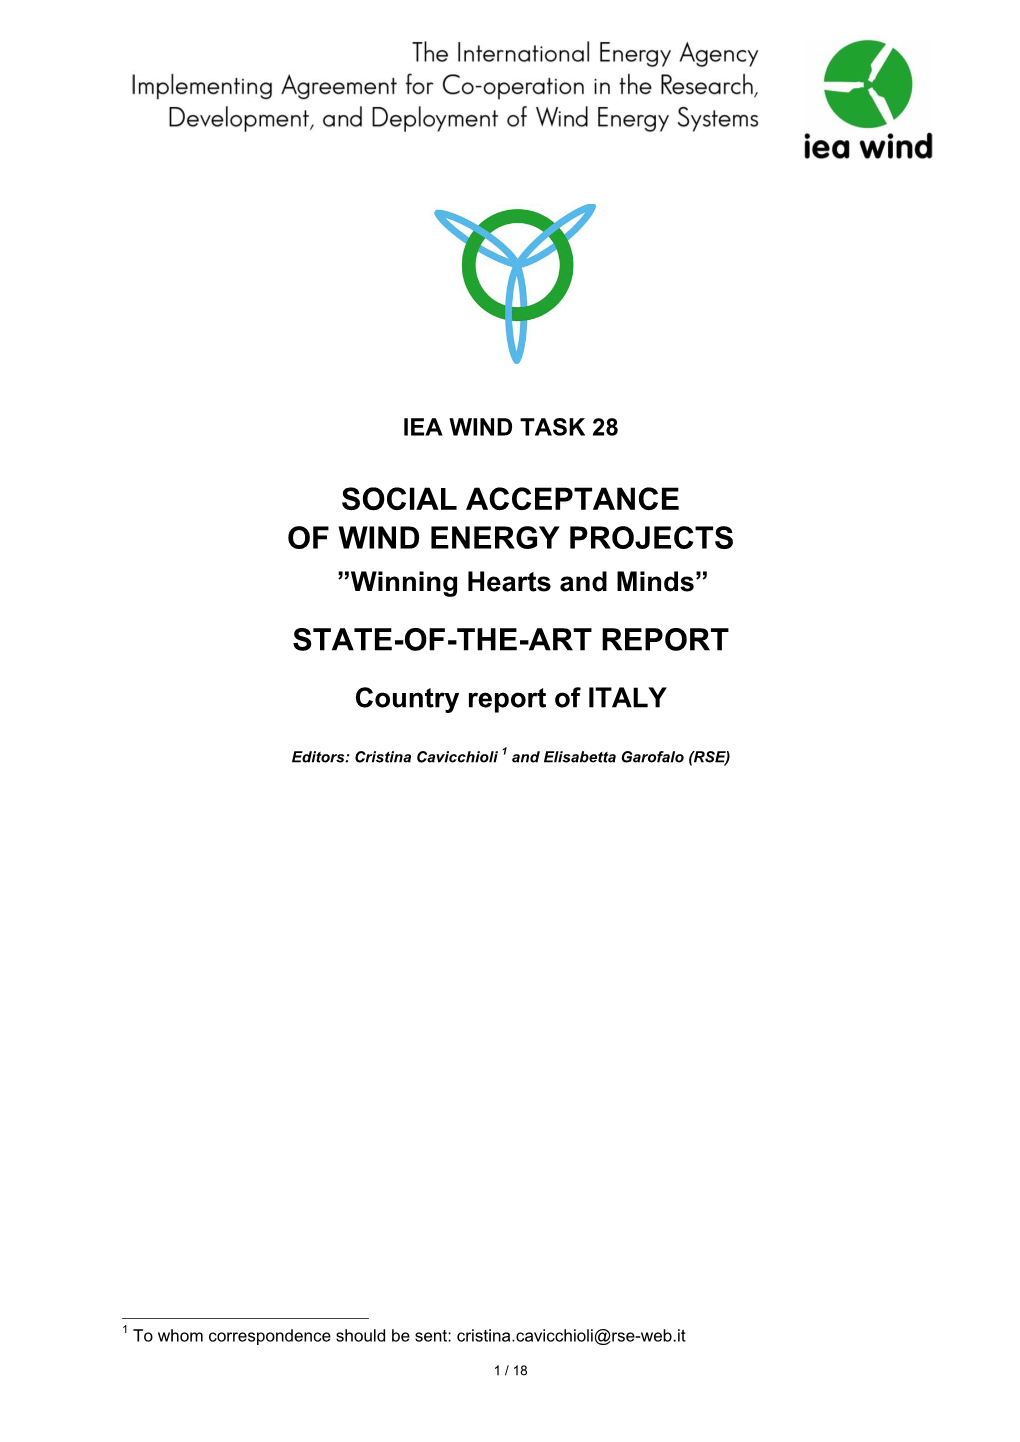 State-Of-The-Art Report on Social Acceptance of Wind Energy, Italy